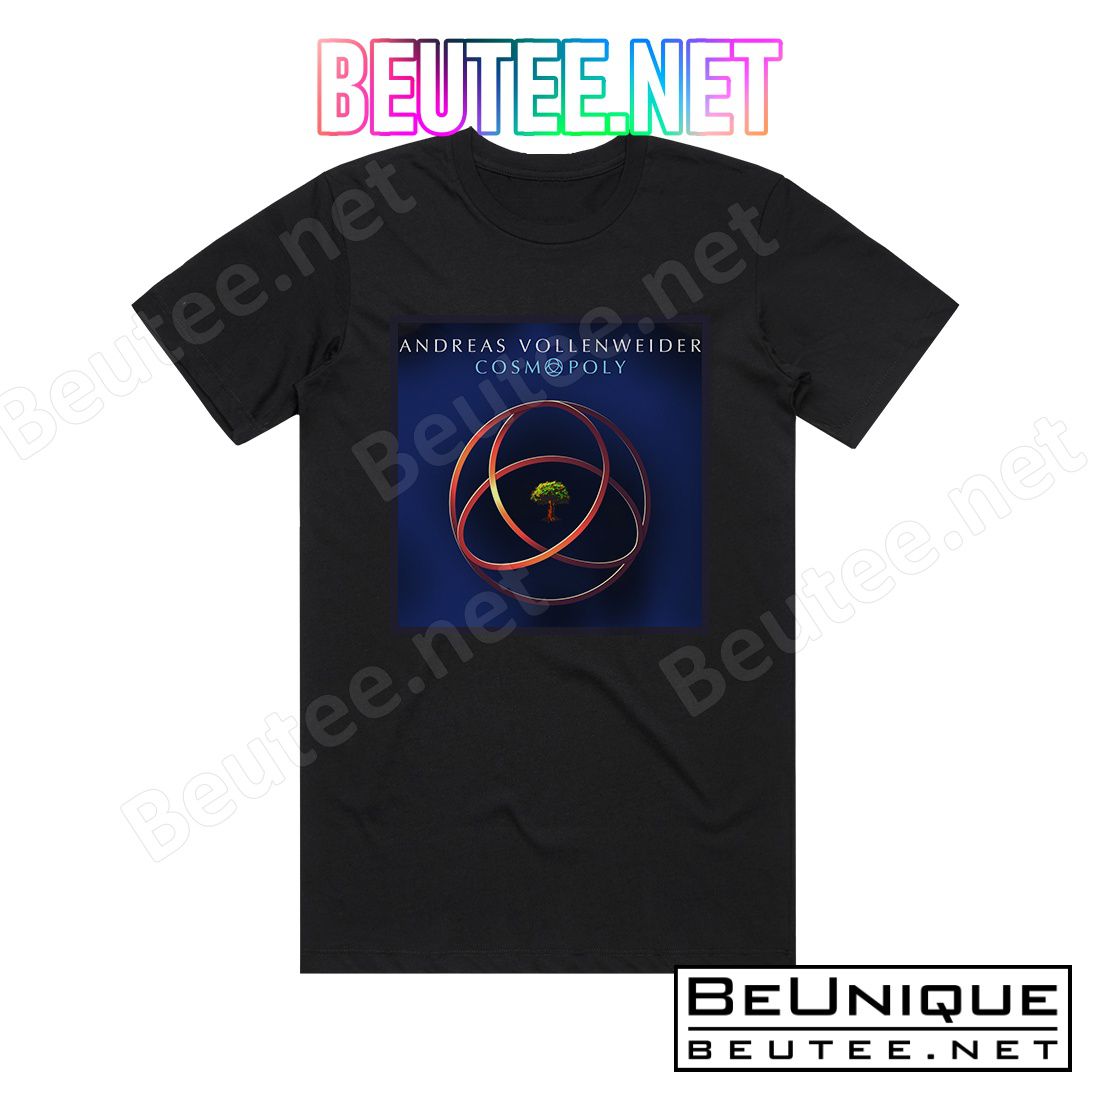 Andreas Vollenweider Cosmopoly 1 Album Cover T-Shirt